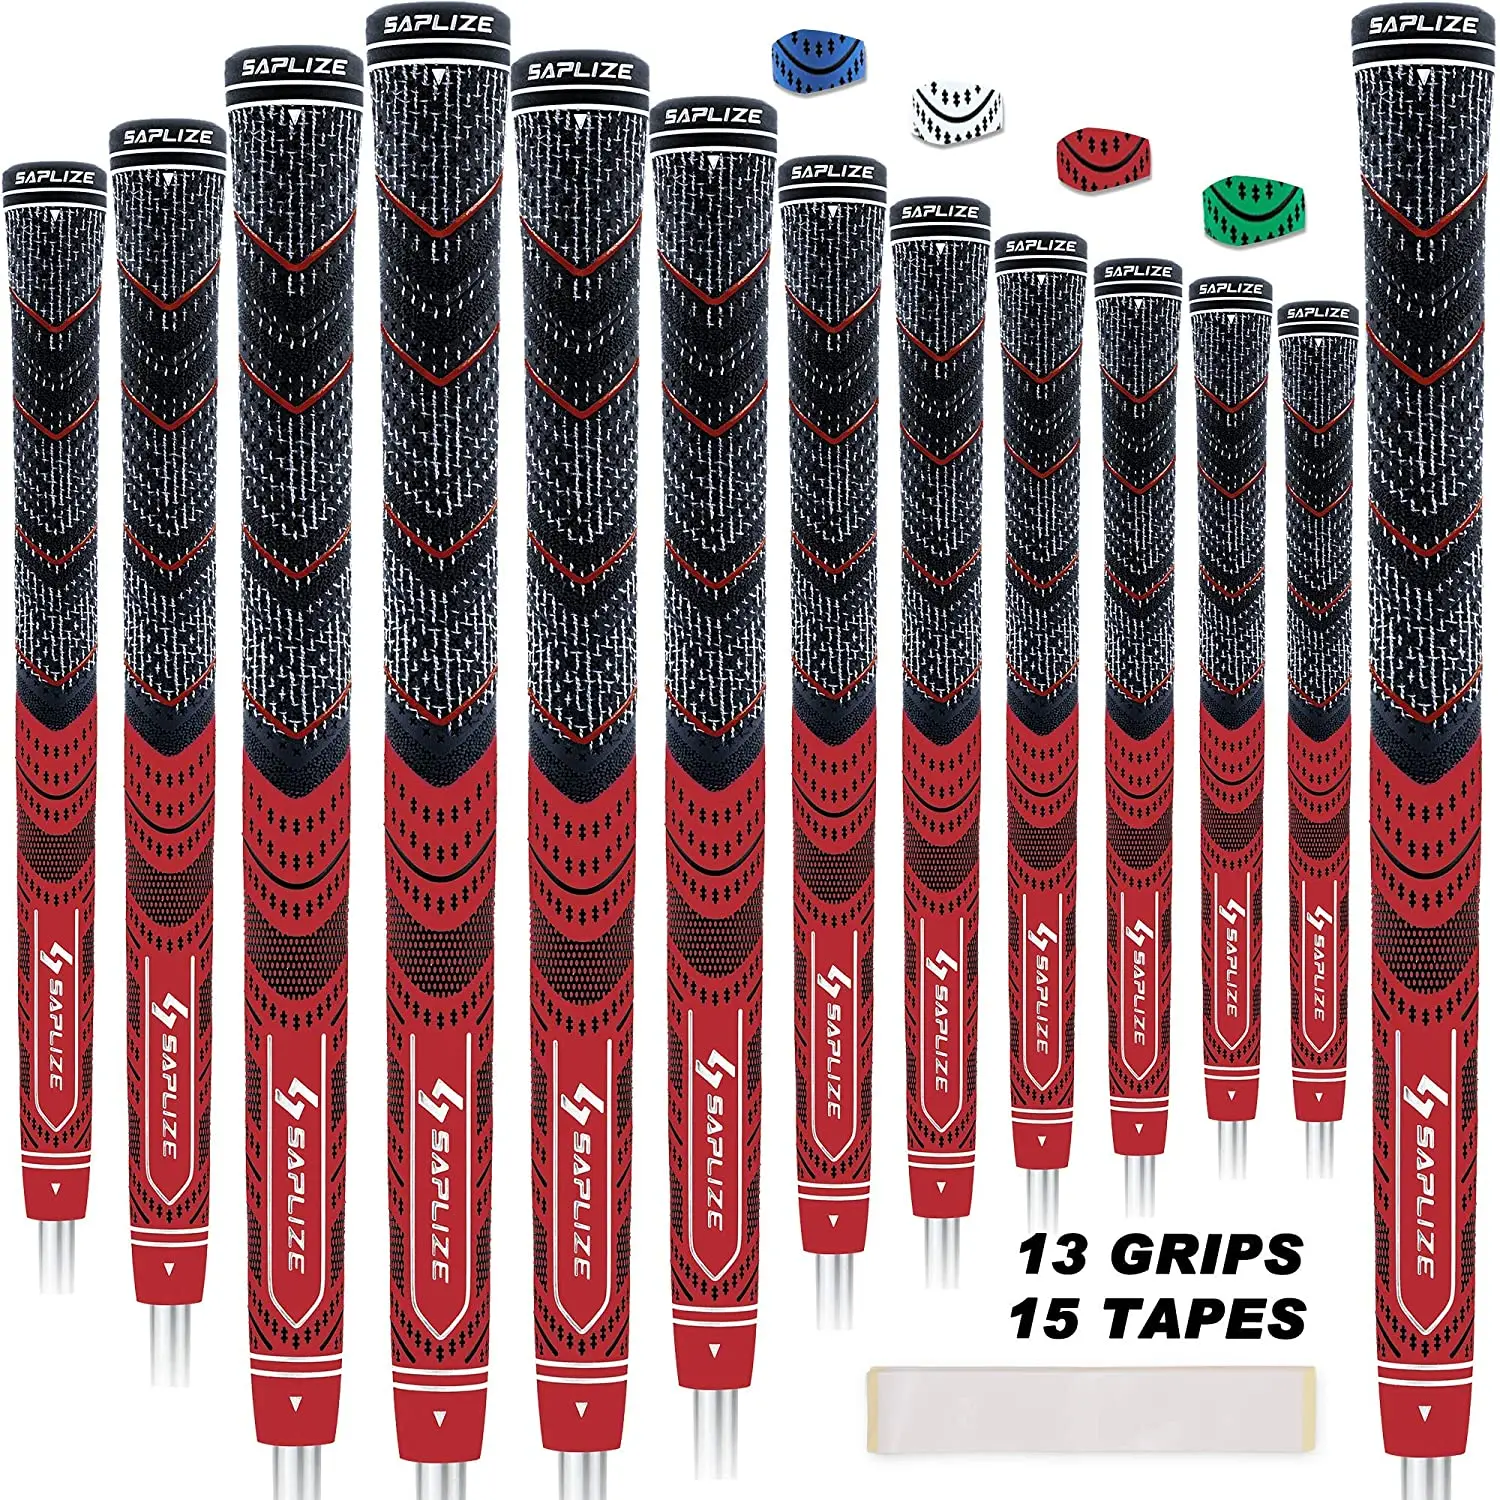 SAPLIZE Golf Grips,  13 Grips with 15 Free Tapes or 13 Grips with Full Regripping Kit, MultiCompound Hybrid Golf Club Grips